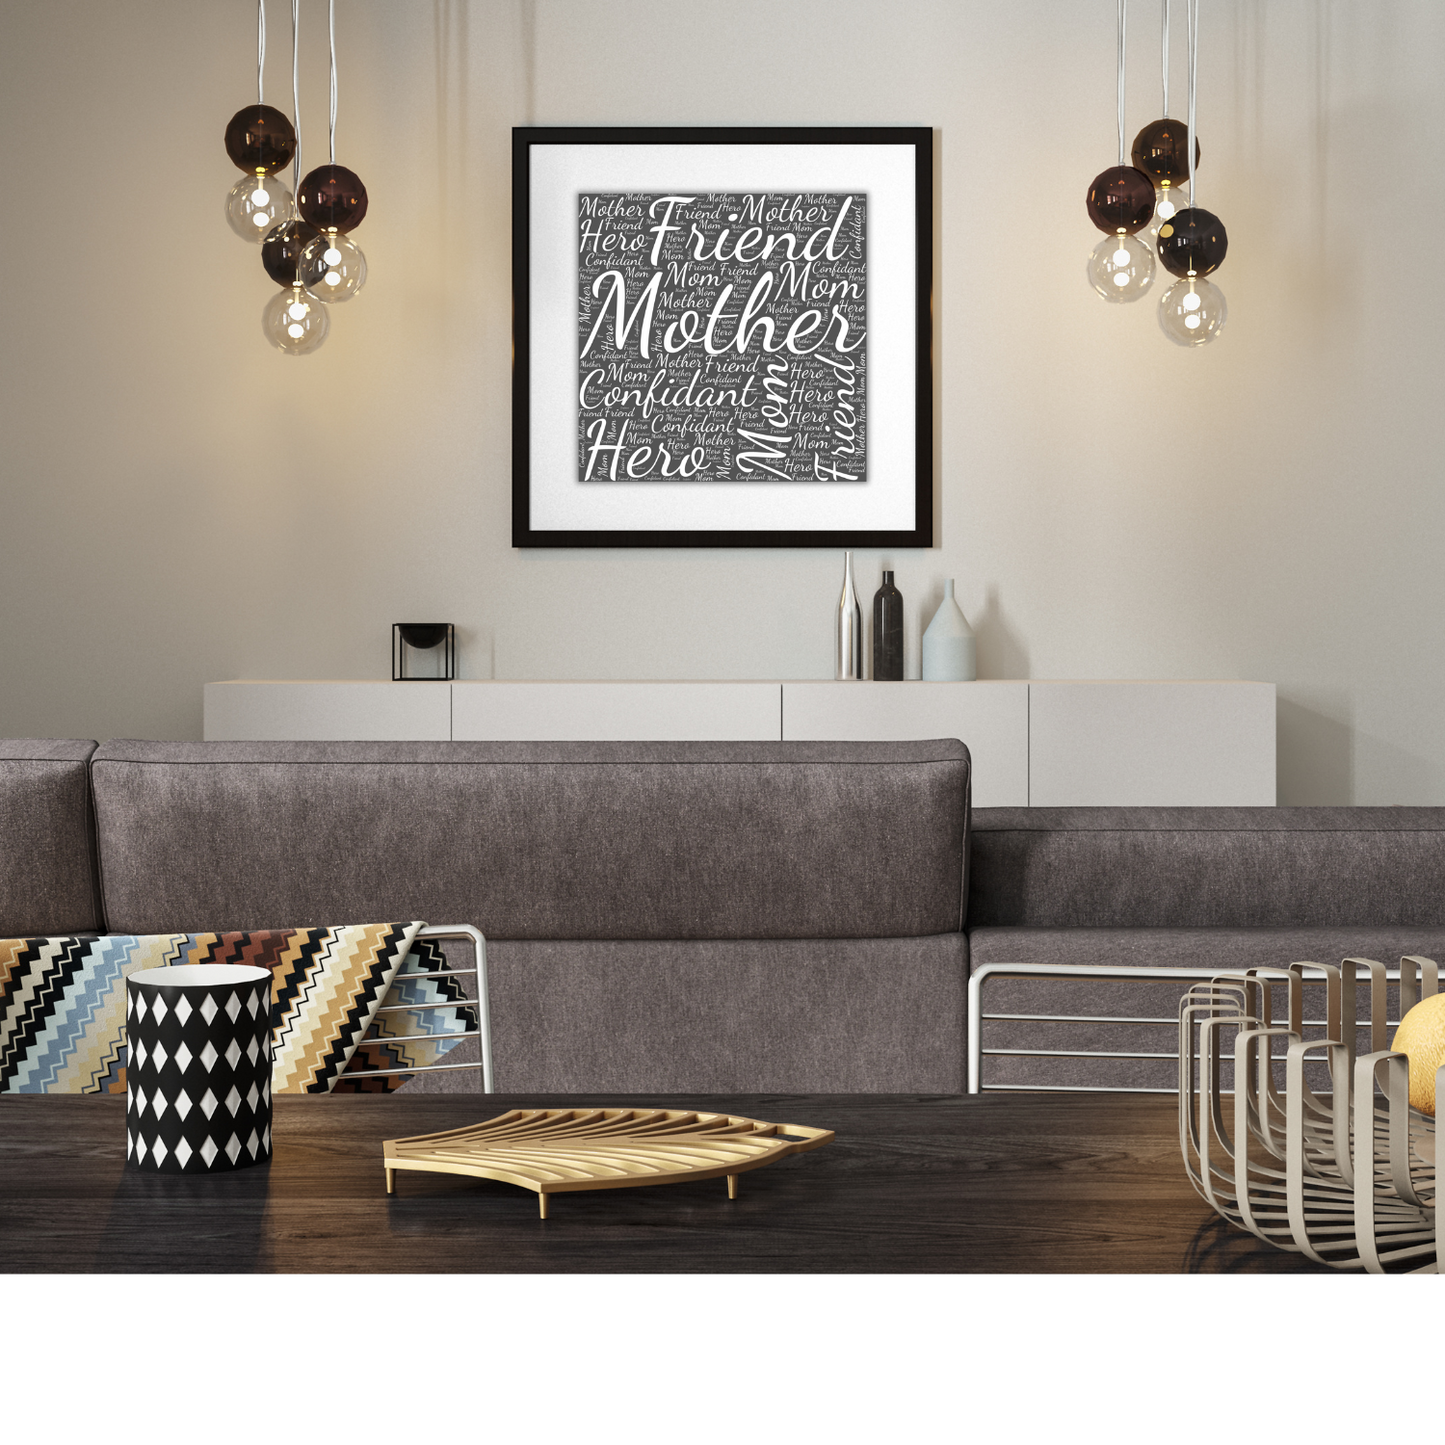 Mom/Mother Word Wall Art Mother's Day Gift for Mom (4 color options)